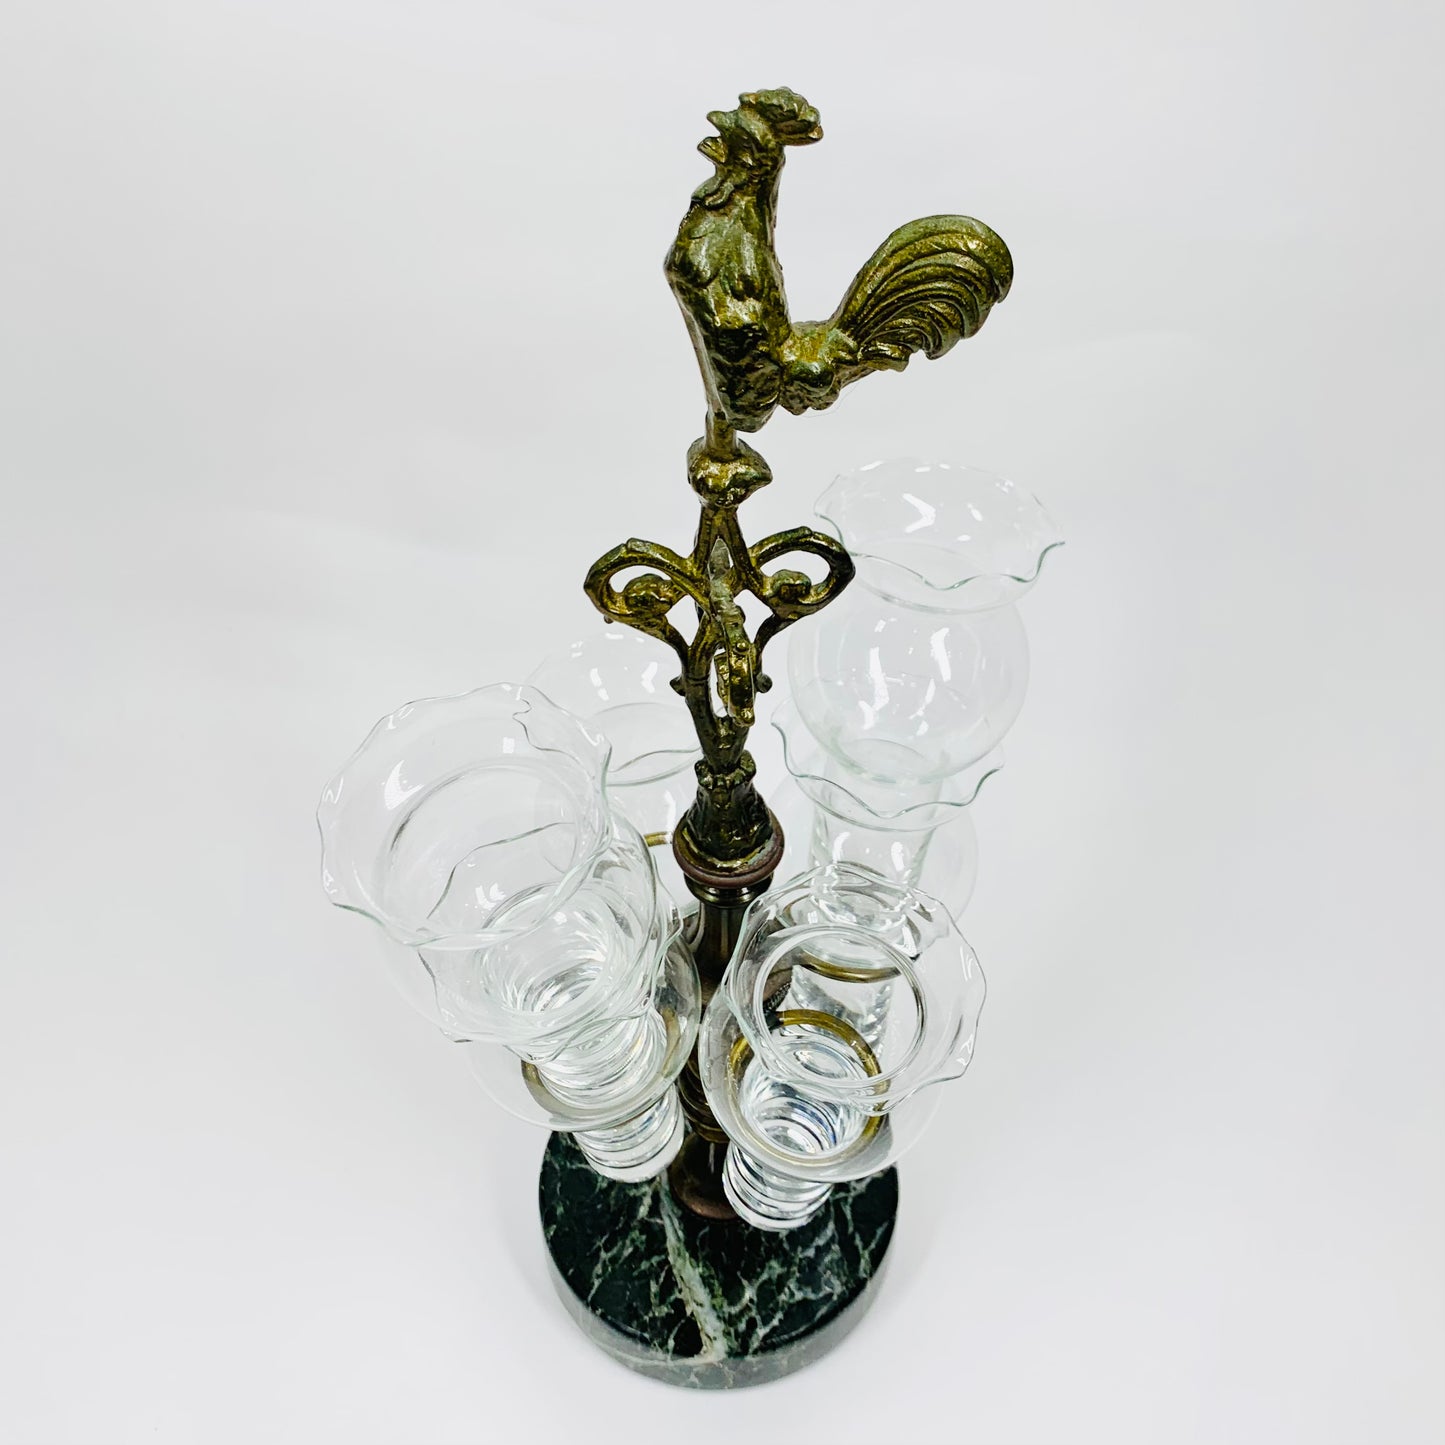 Antique Petite Choses brass epergne with rooster centrepiece and green marble base